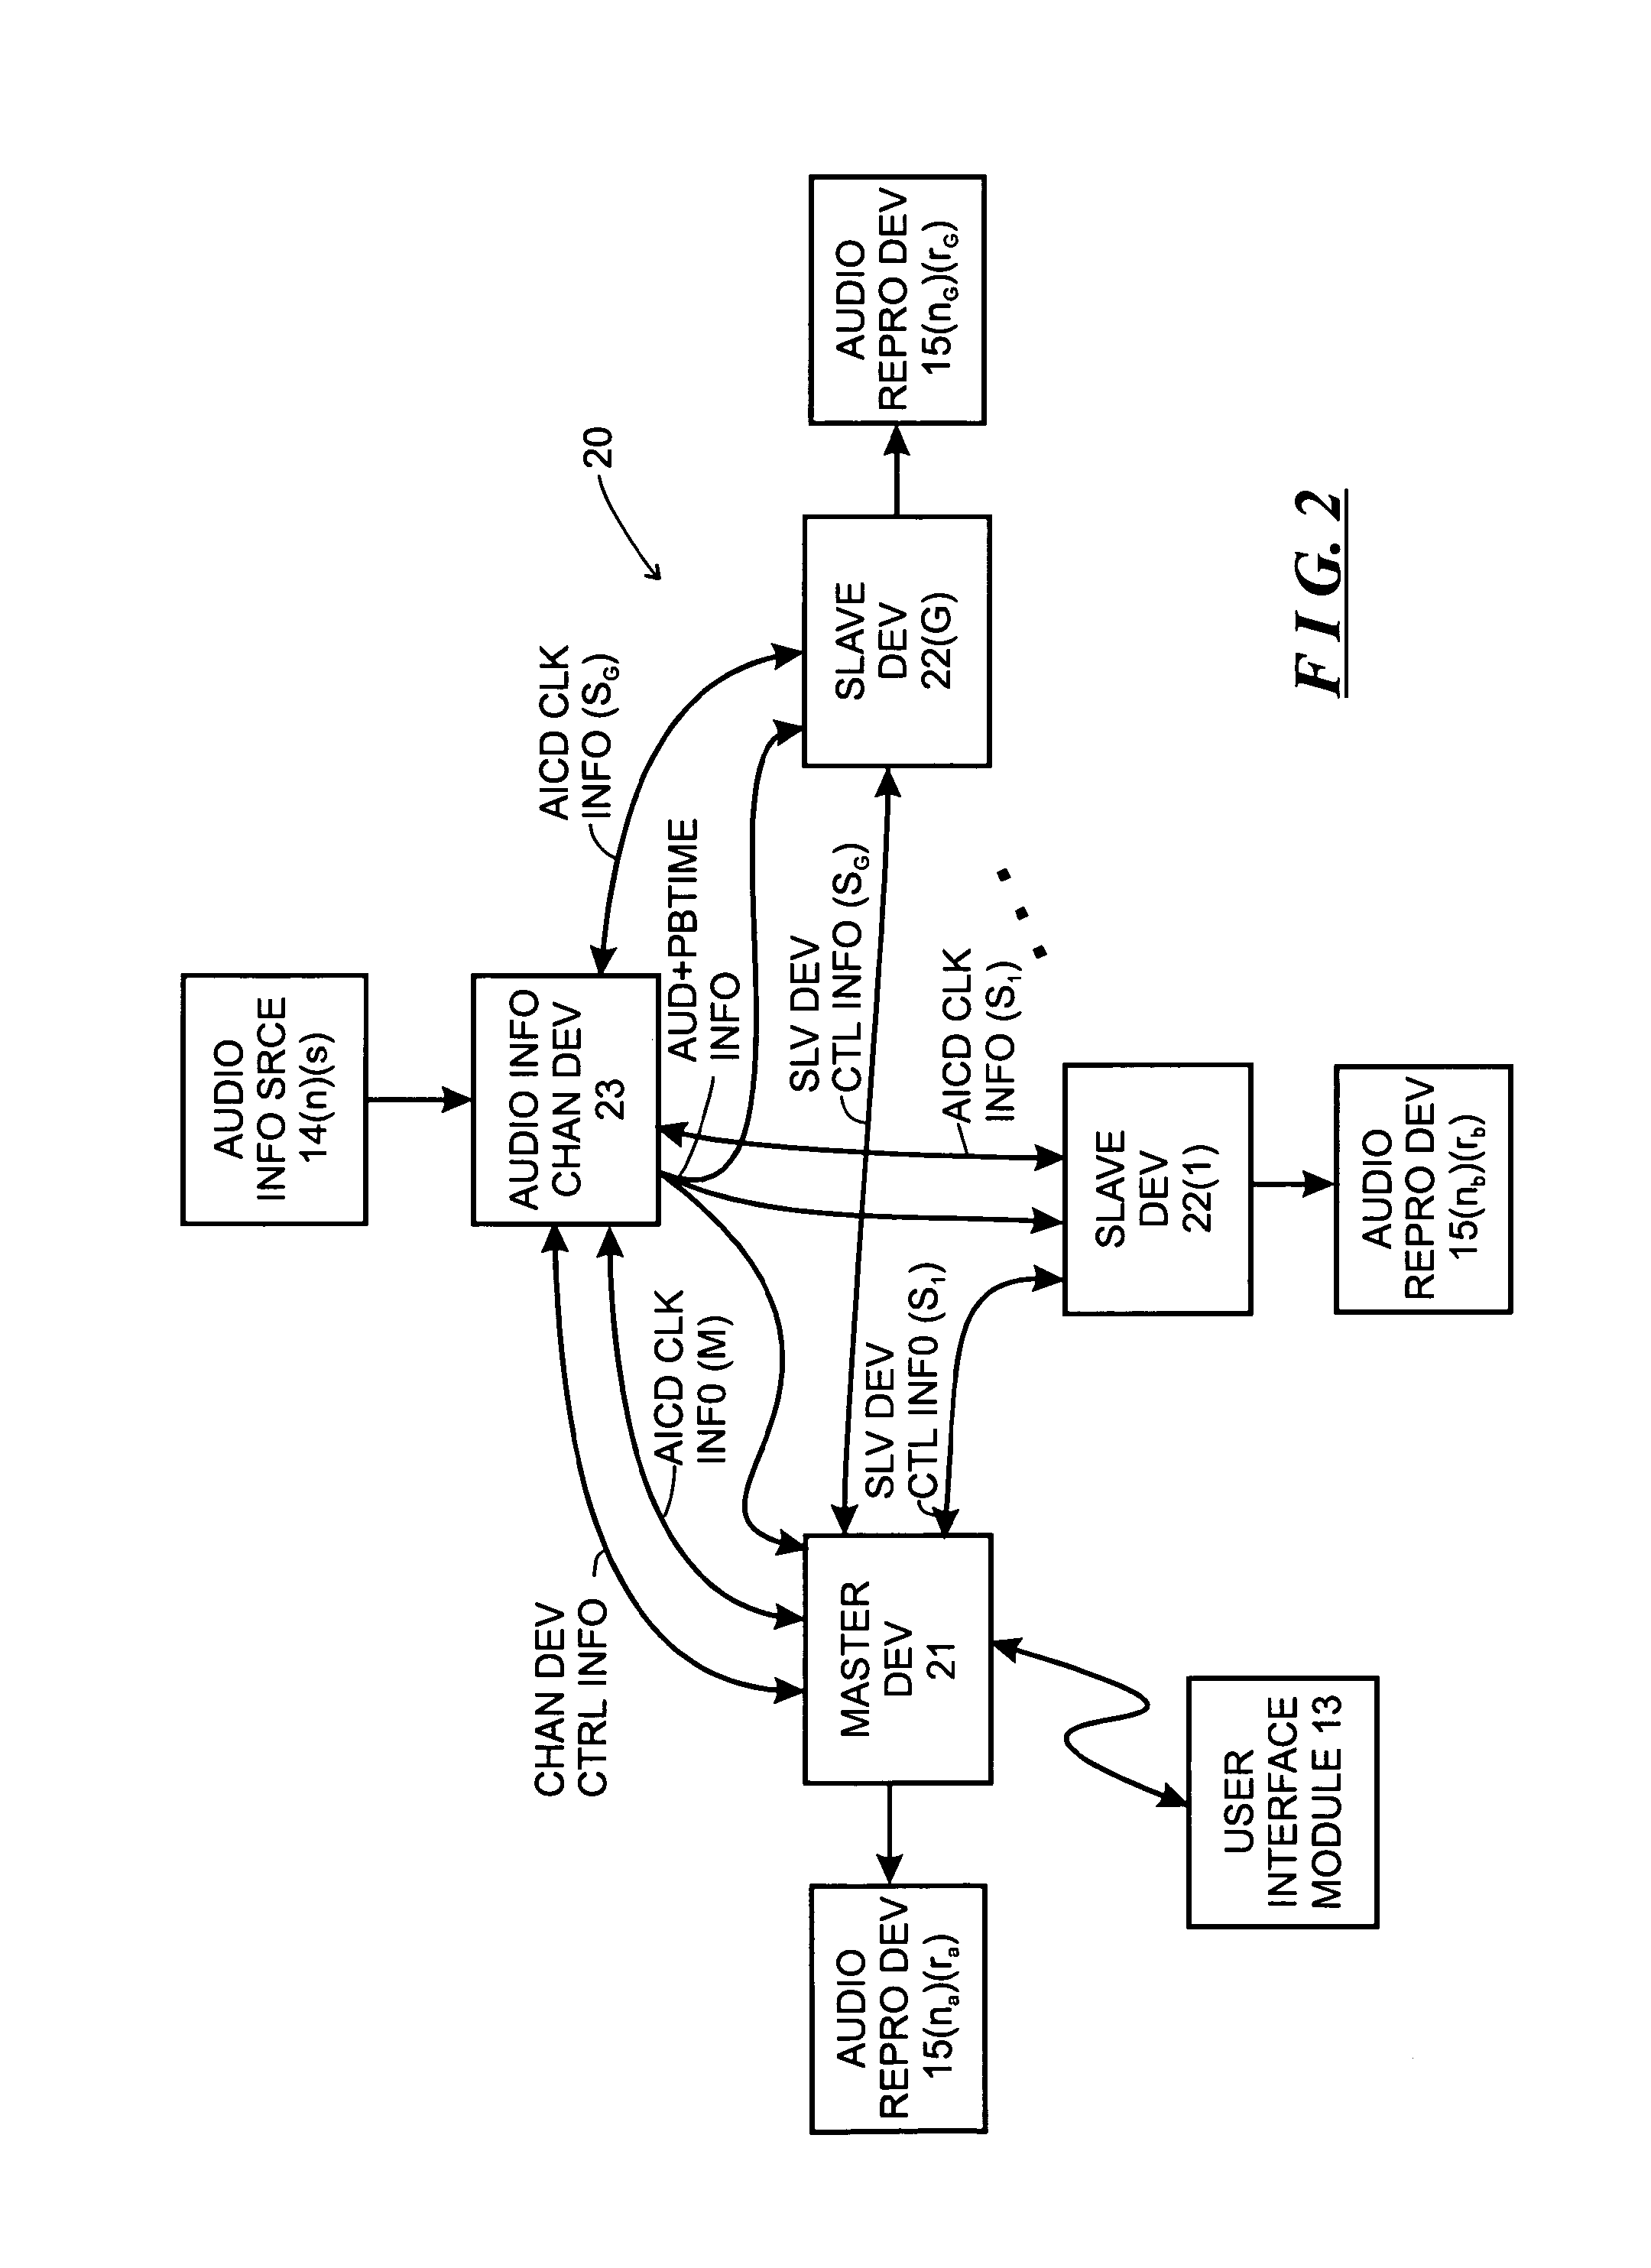 Method and apparatus for providing synchrony group status information